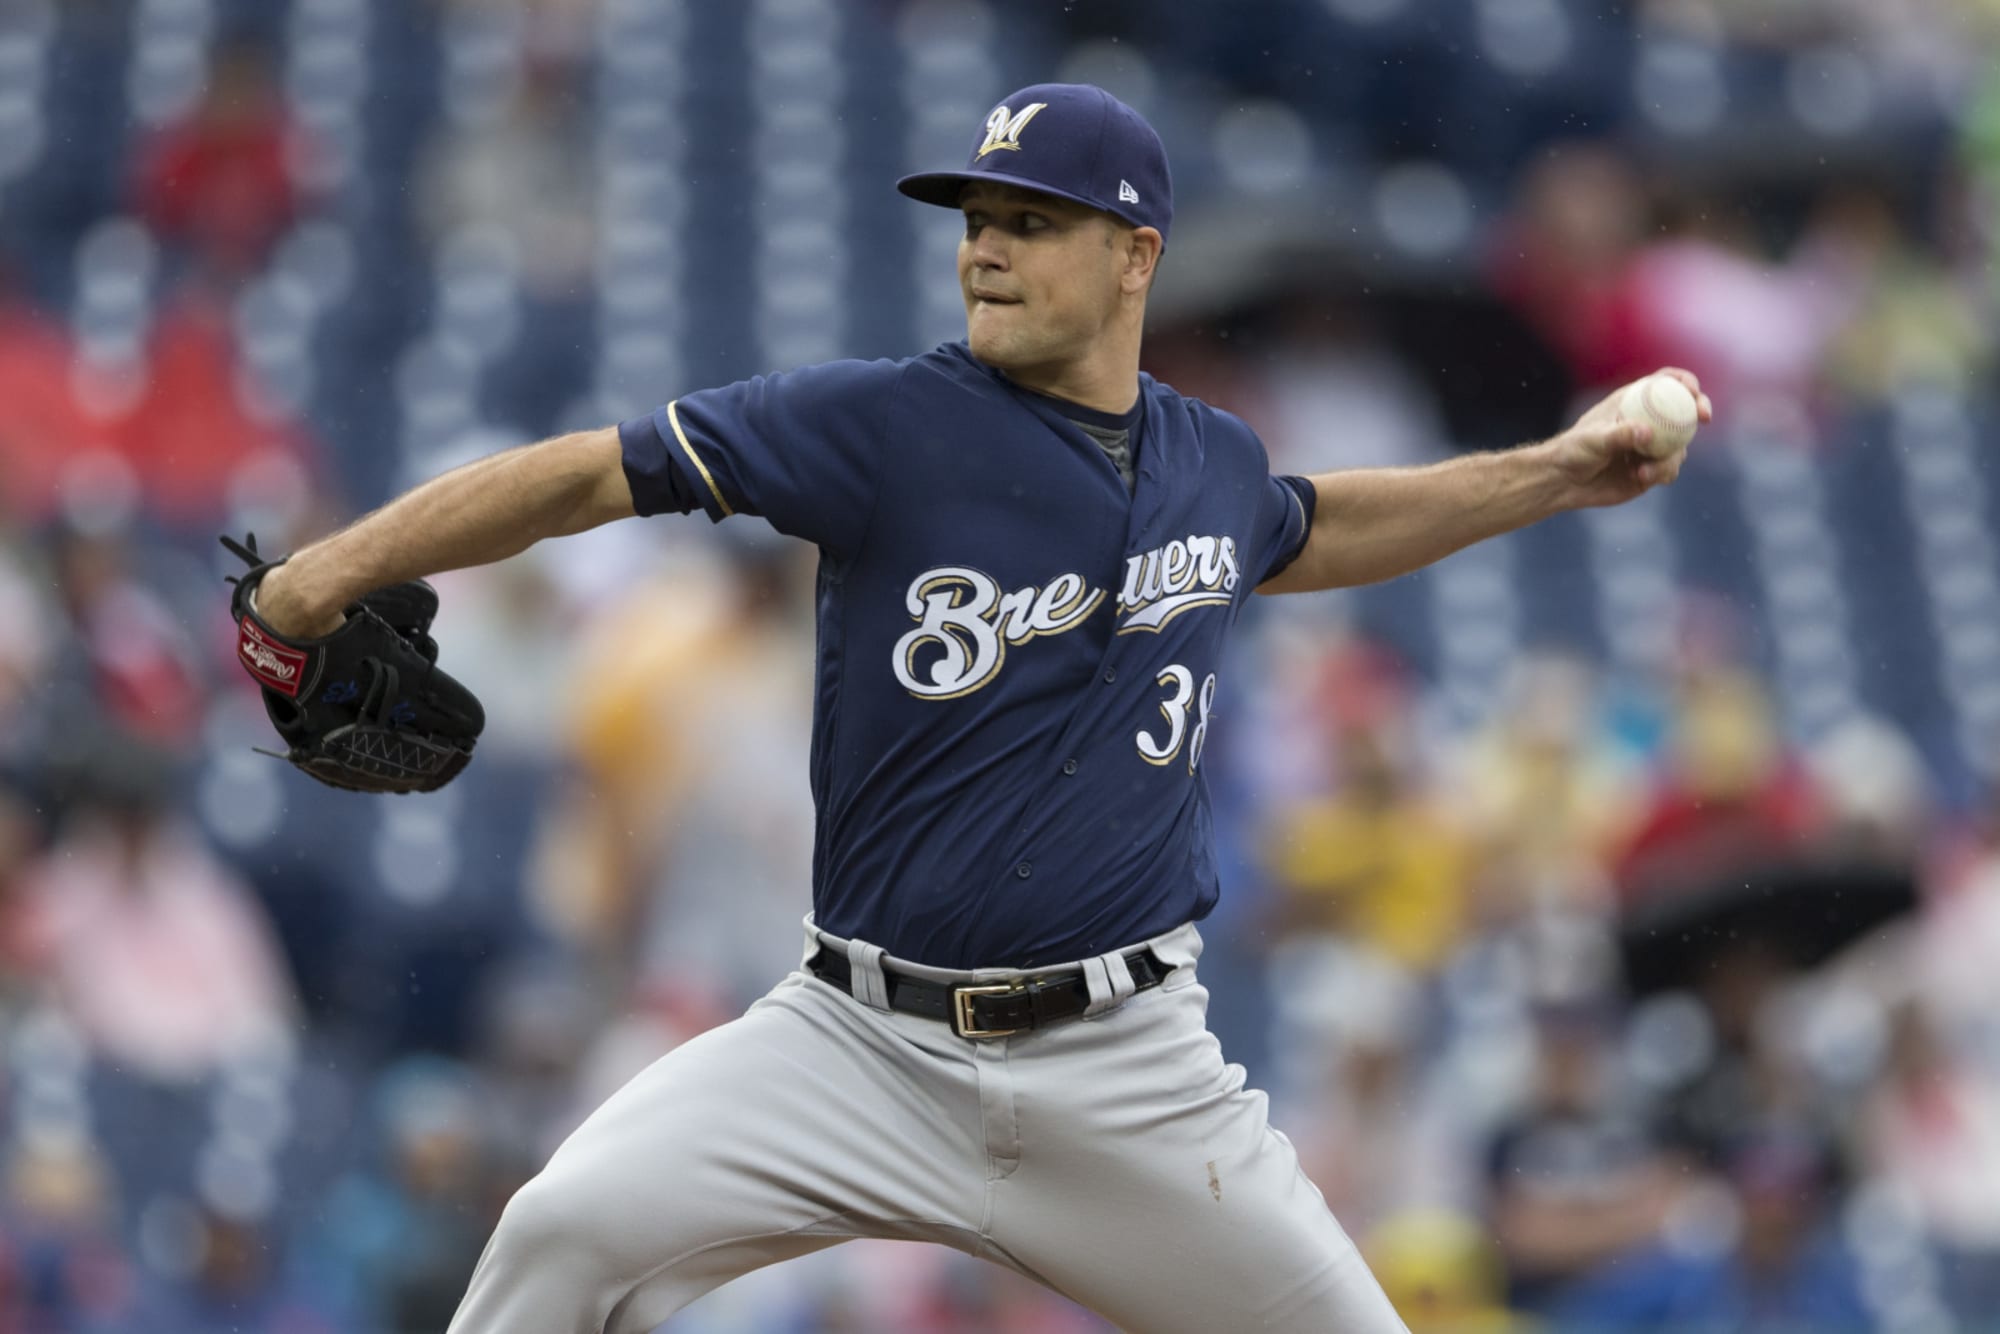 Washington Nationals: Dan Jennings could be the lefty the bullpen needs